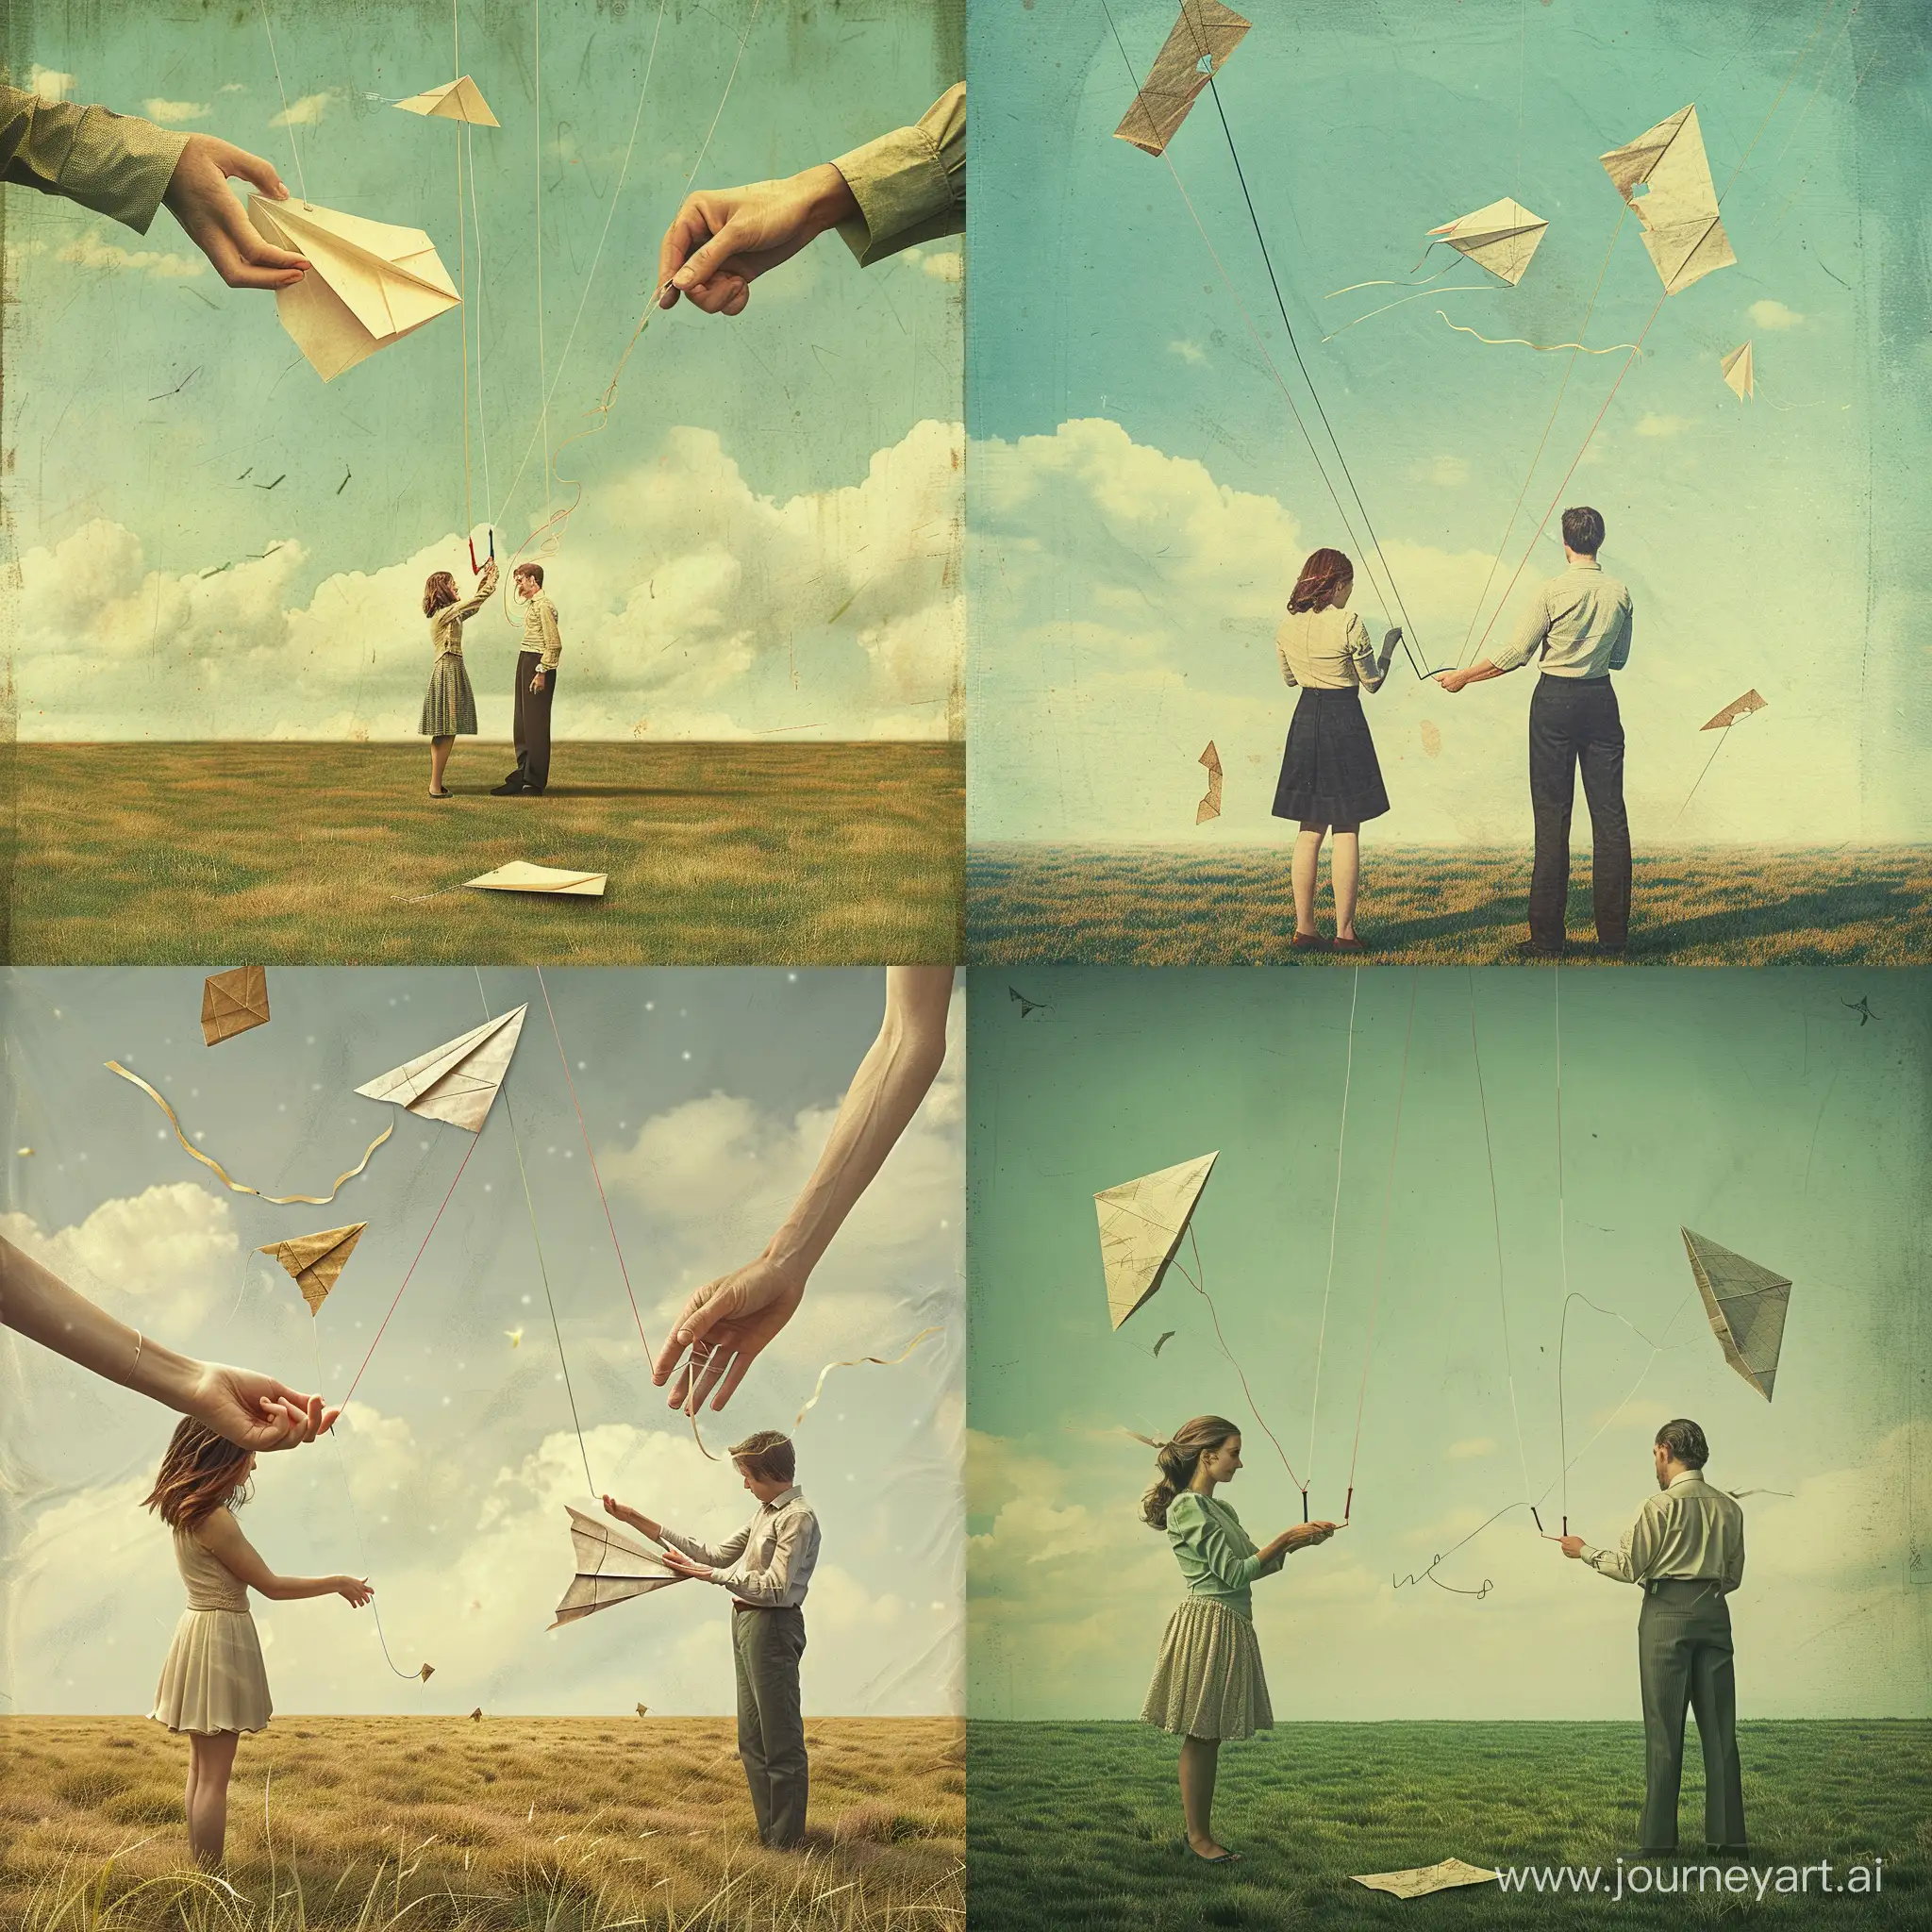 Couple-Flying-Kites-in-Grass-Field-Womans-Kite-Falling-Mans-Soaring